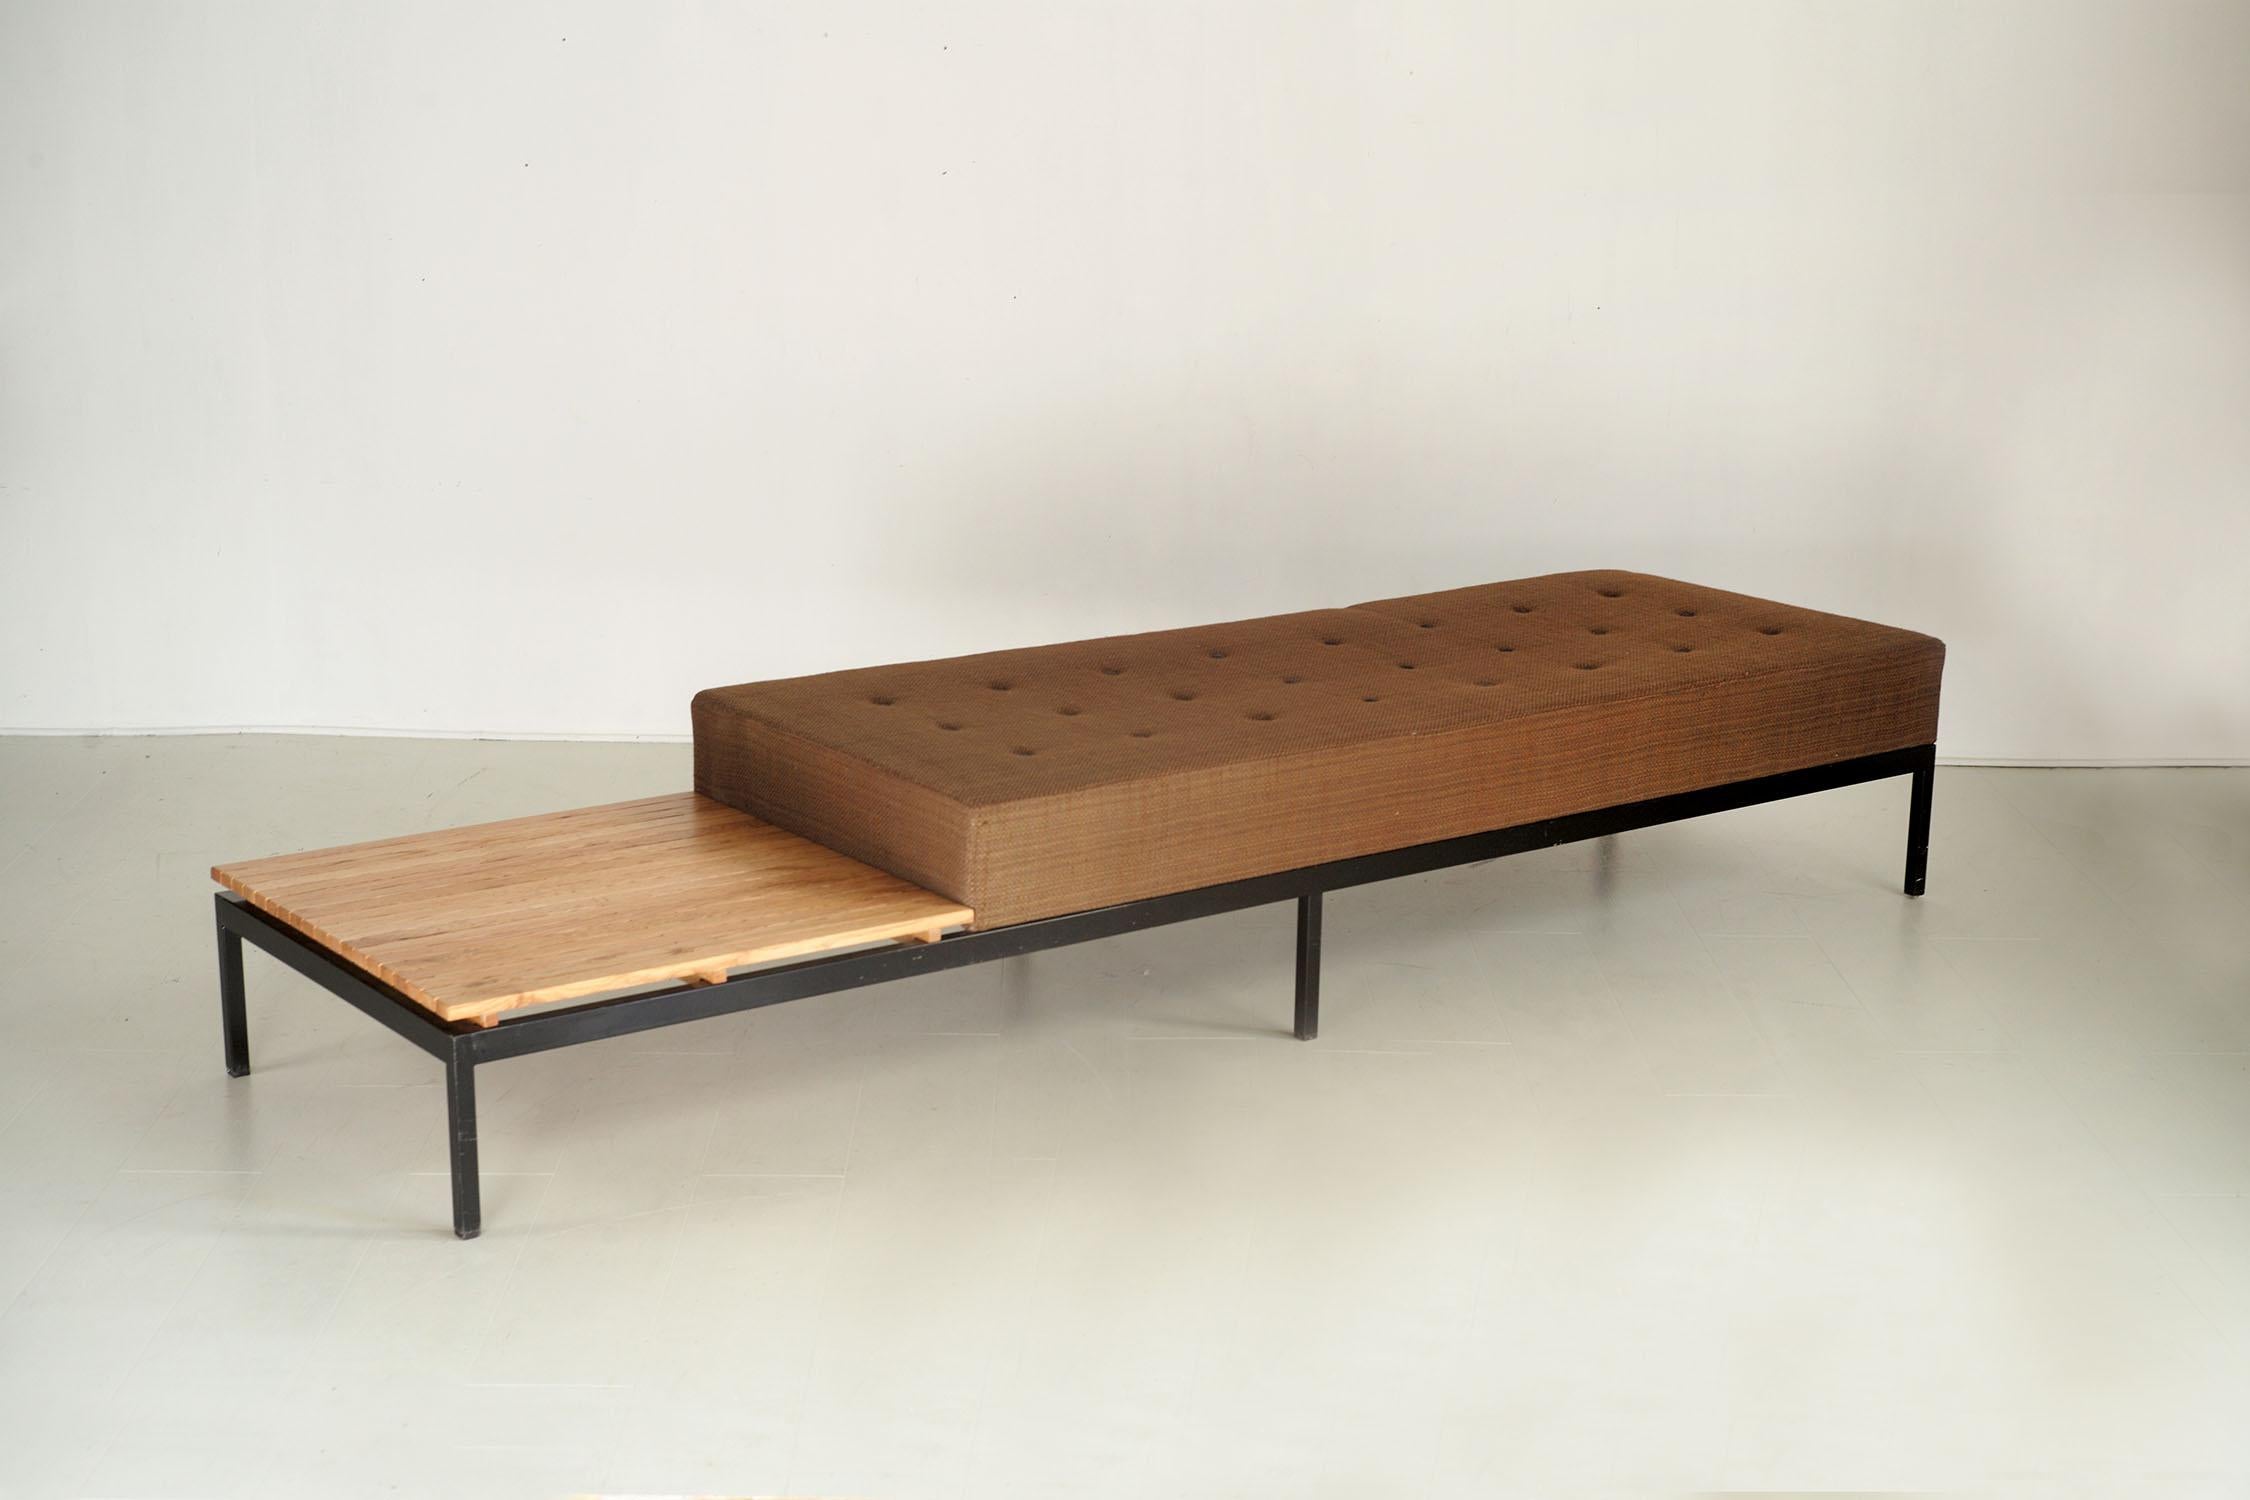 Bench/daybed 070 by Kho Liang Le for Artifort, 1962. On a quadrangular metal base with 6 legs is placed a mattress covered in a chocolate-colored wool fabric, stitched with black buttons. A slatted American oak shelf rests on the structure (it can